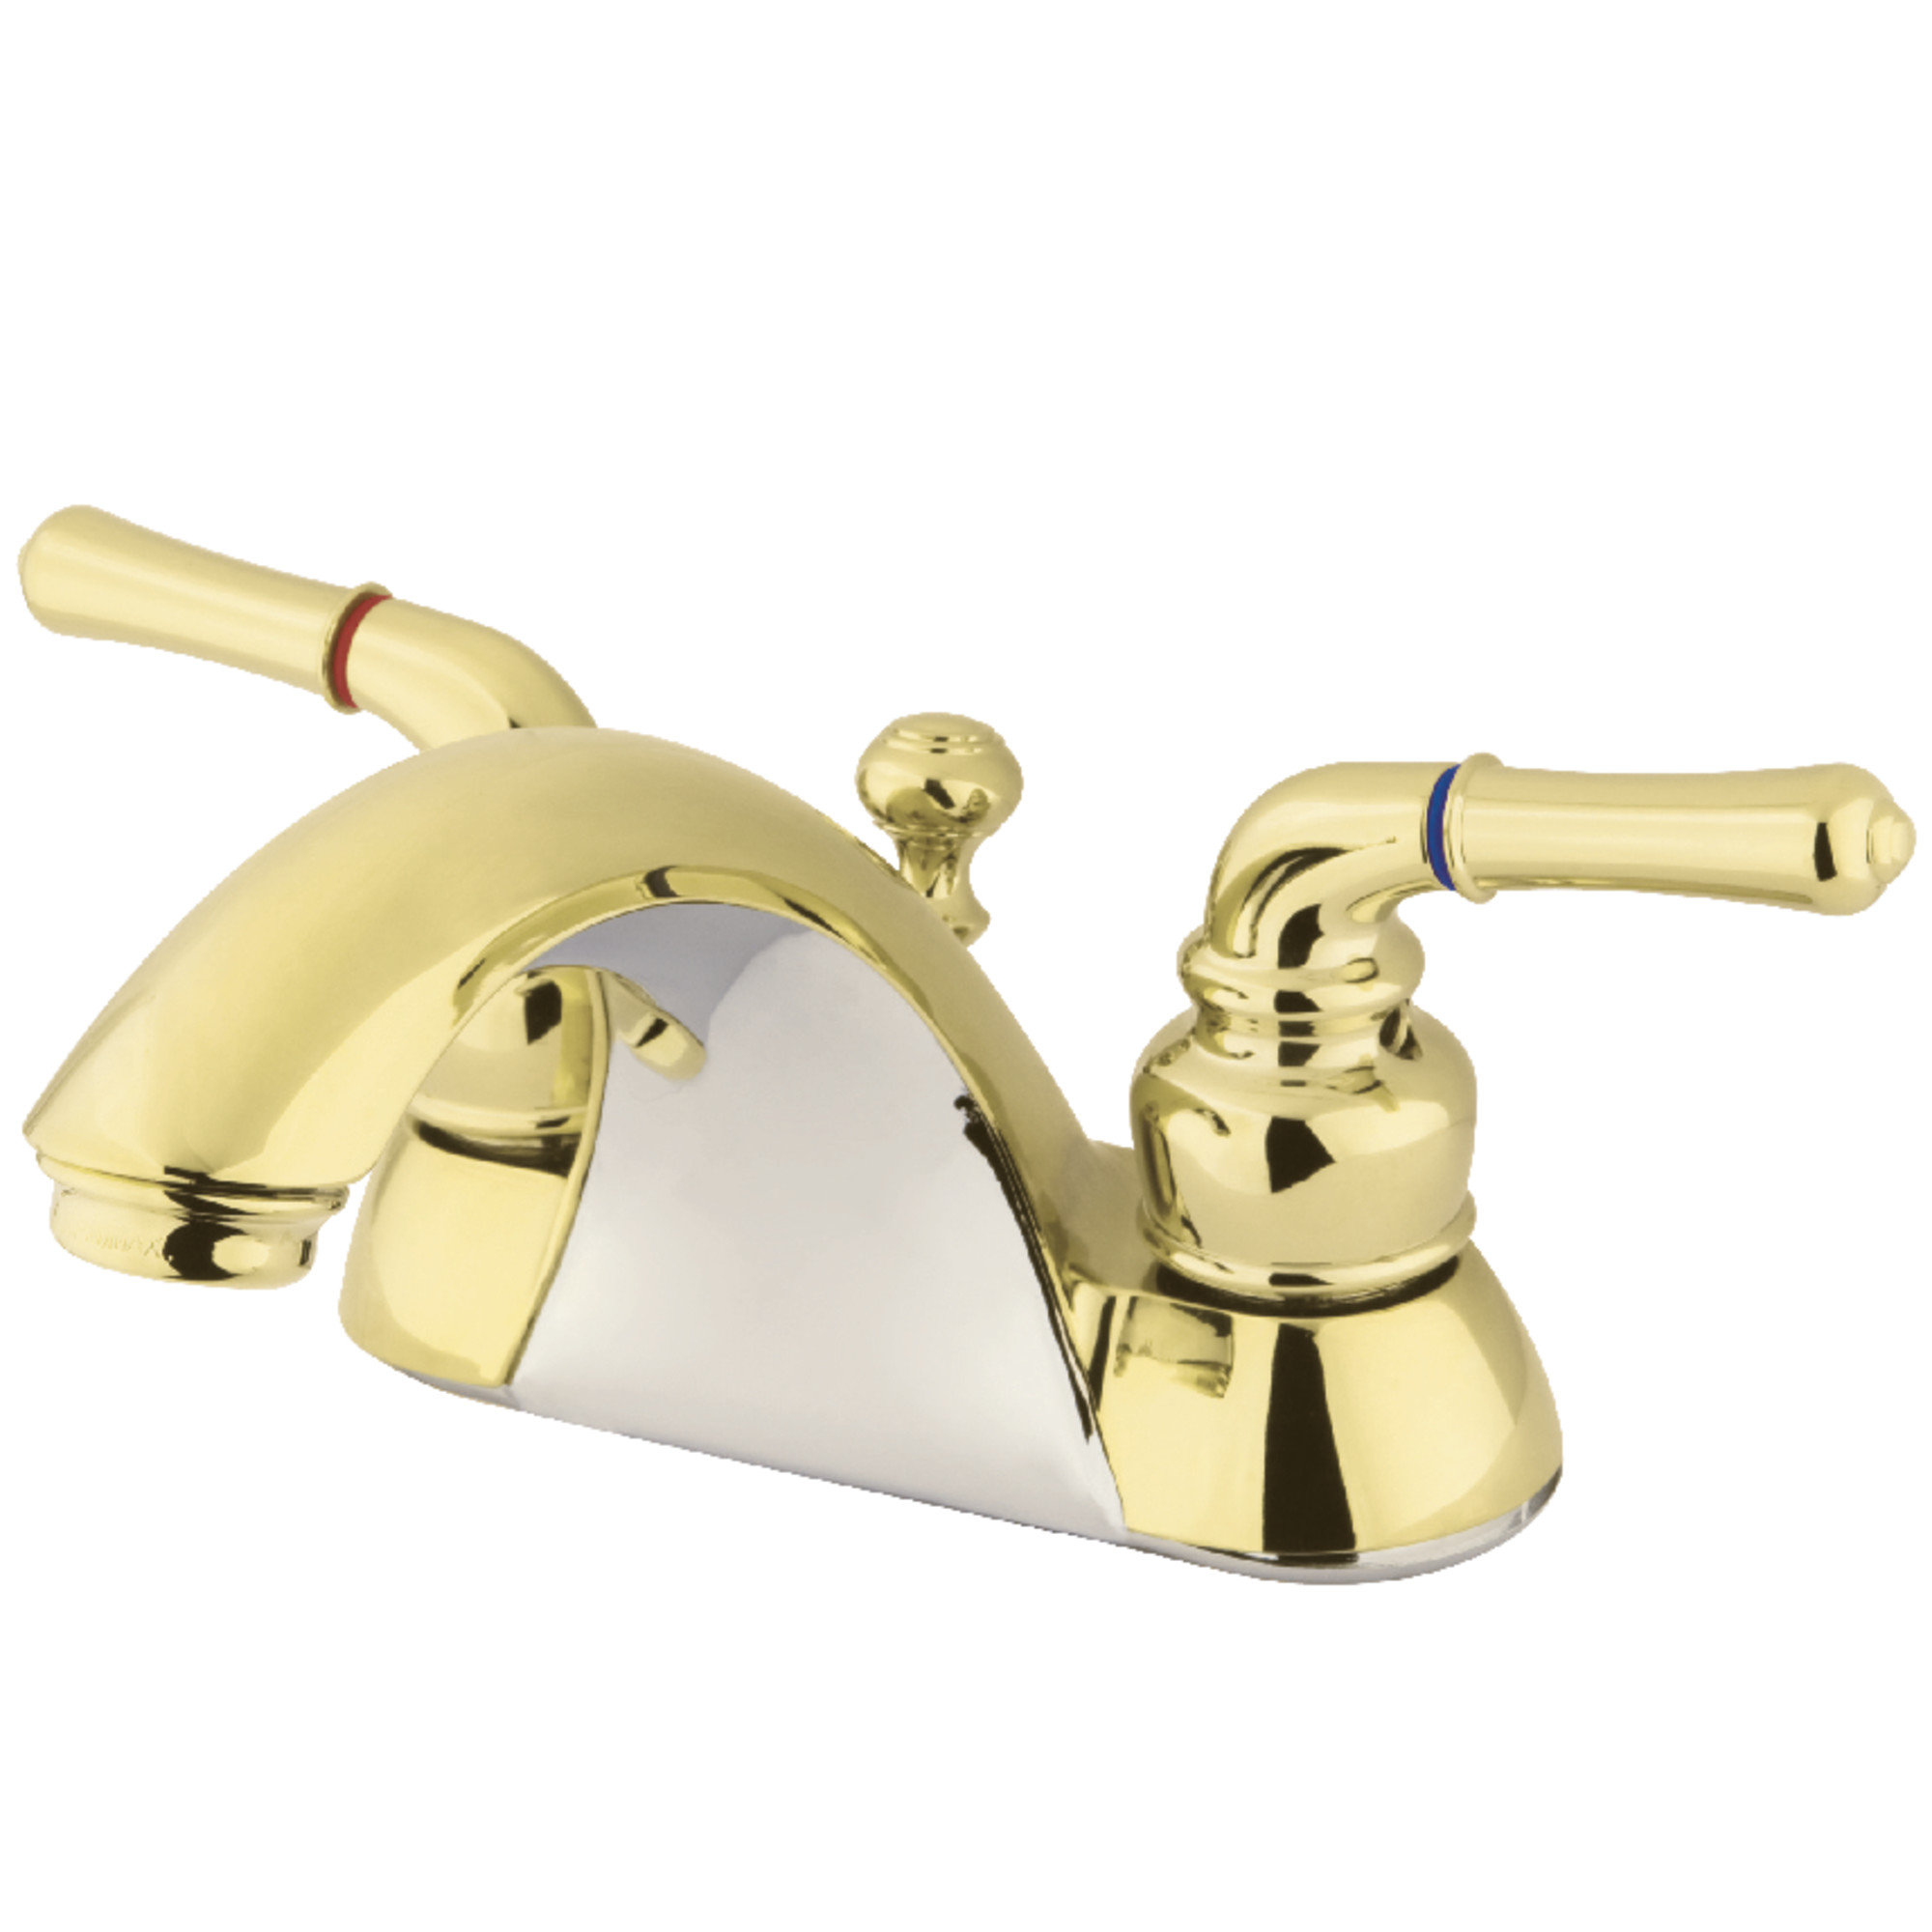 Kingston Brass Naples Centerset Bathroom Sink Faucet With Matching